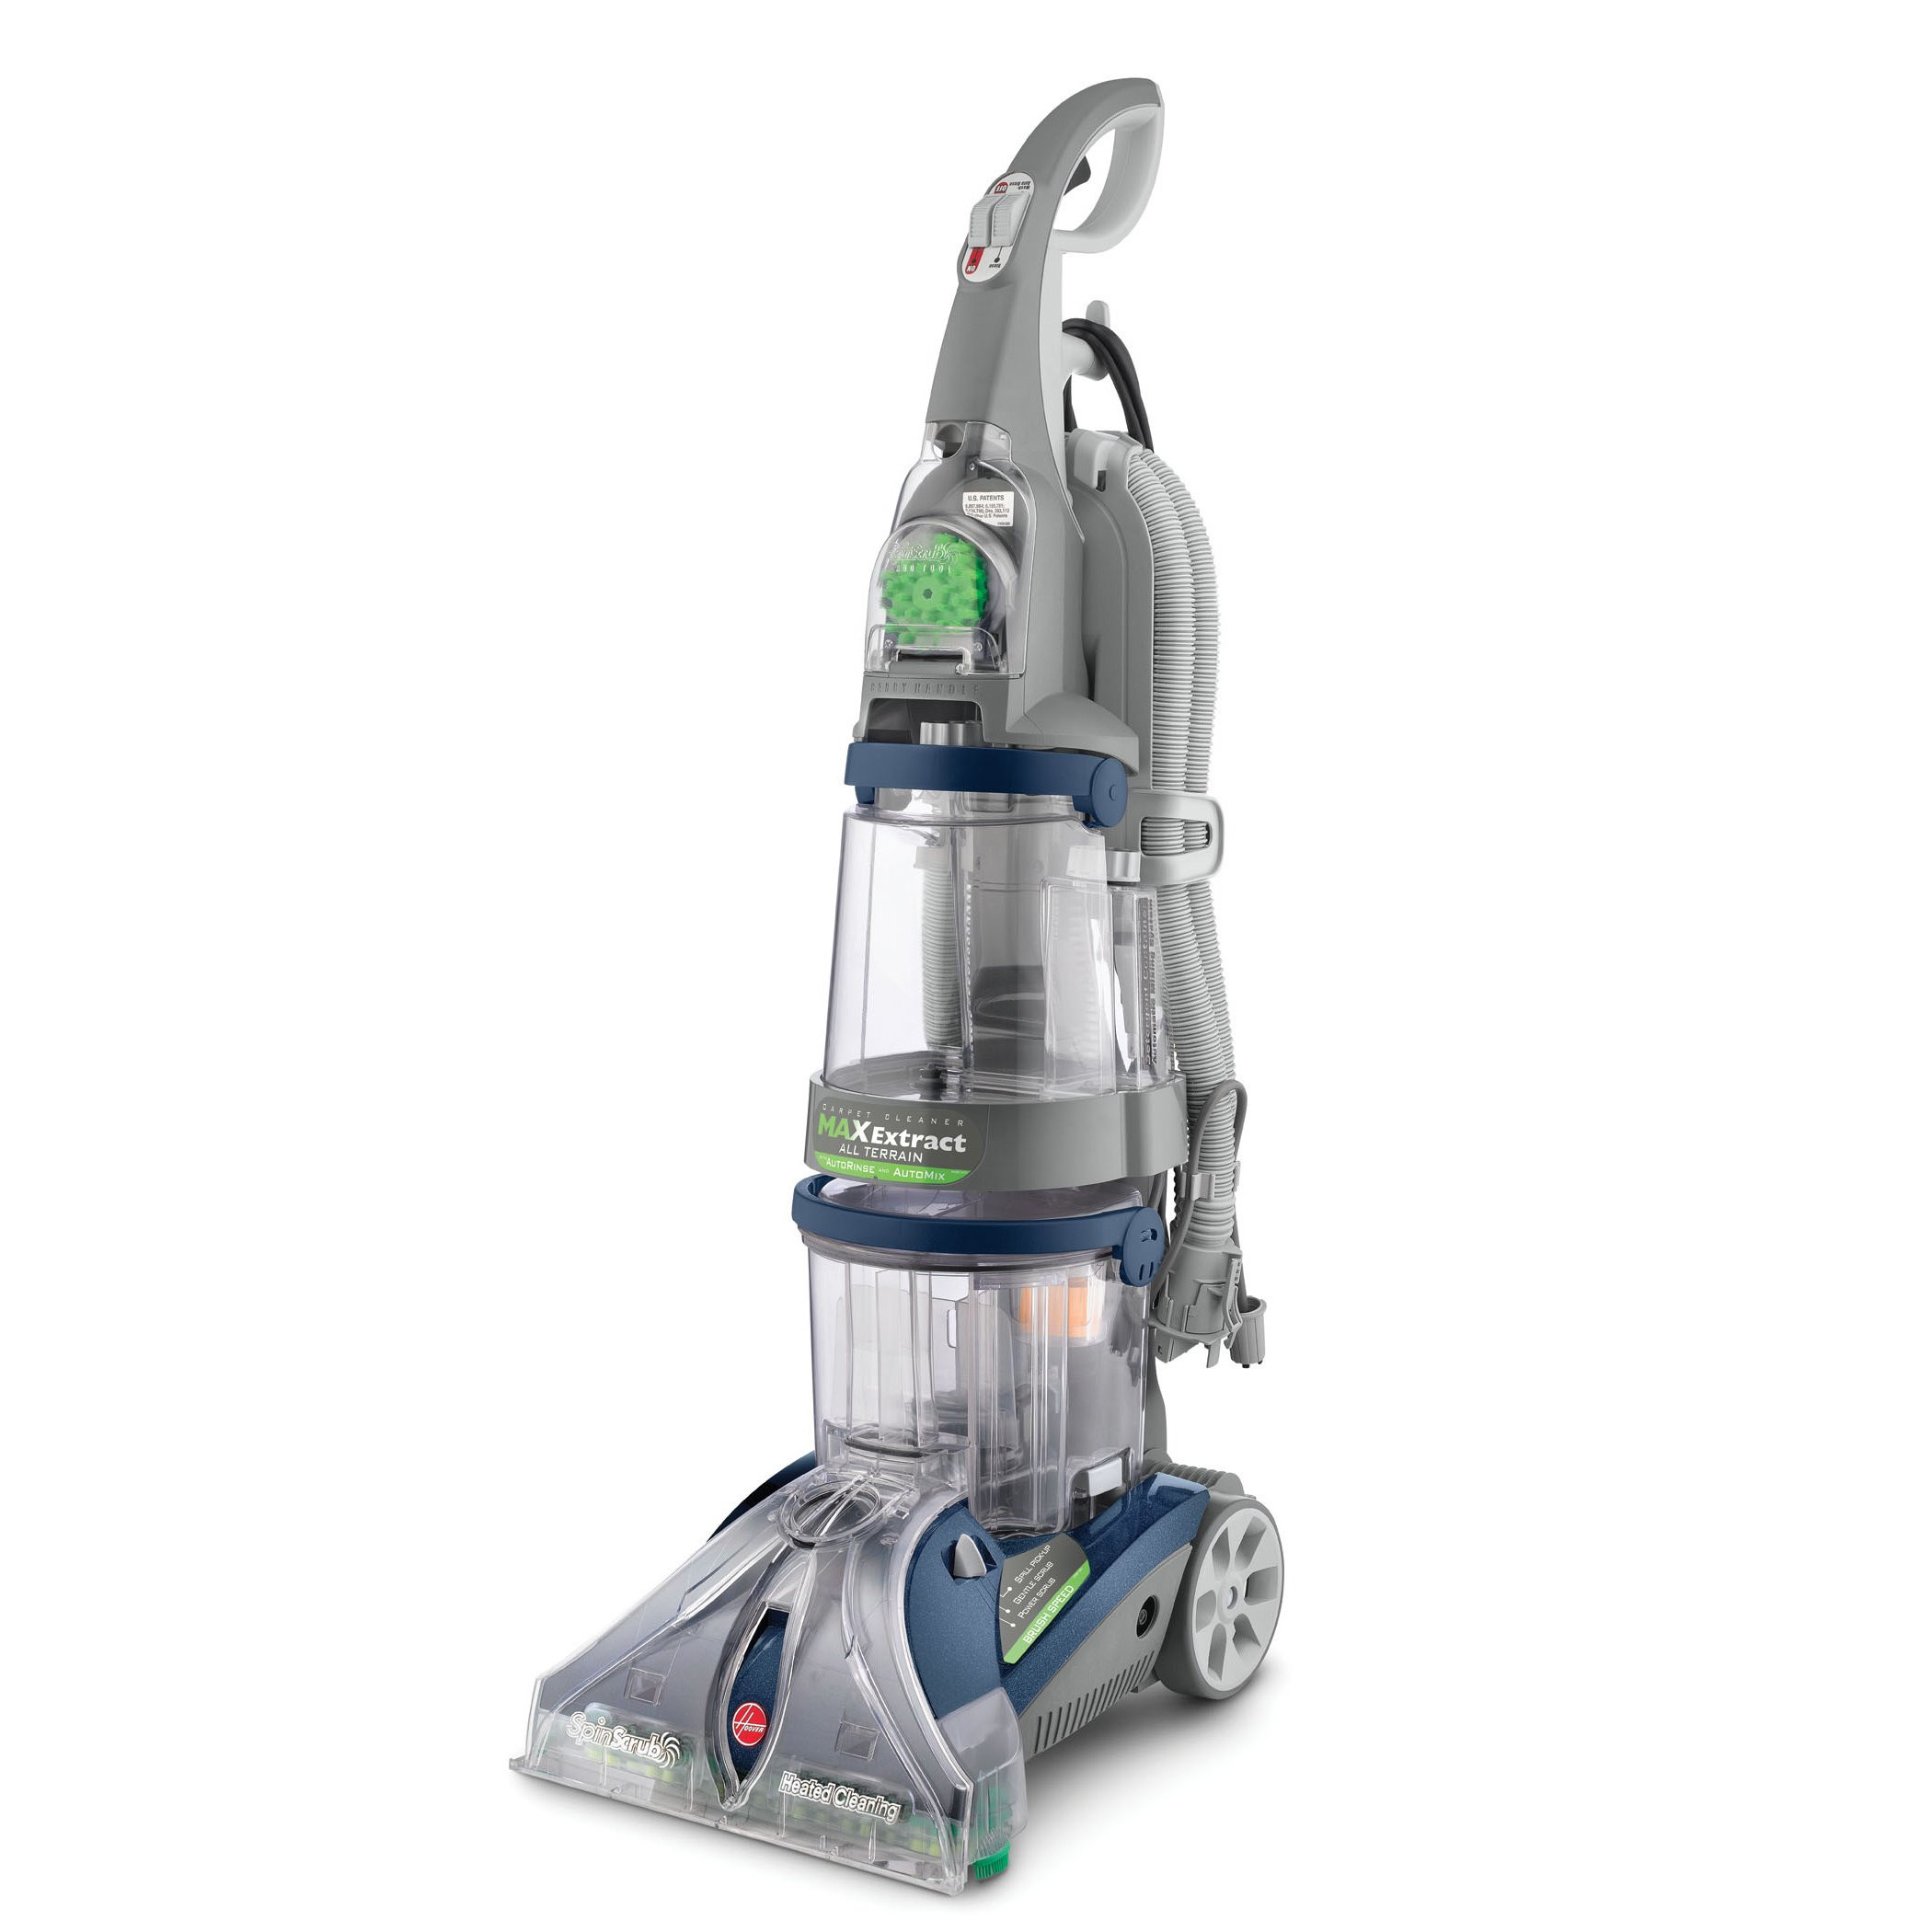 21 Famous Hardwood Floor Cleaners Consumer Reviews 2024 free download hardwood floor cleaners consumer reviews of shop hoover f7452 900 steamvac all terrain 6 brush dual v deep pertaining to shop hoover f7452 900 steamvac all terrain 6 brush dual v deep cleane